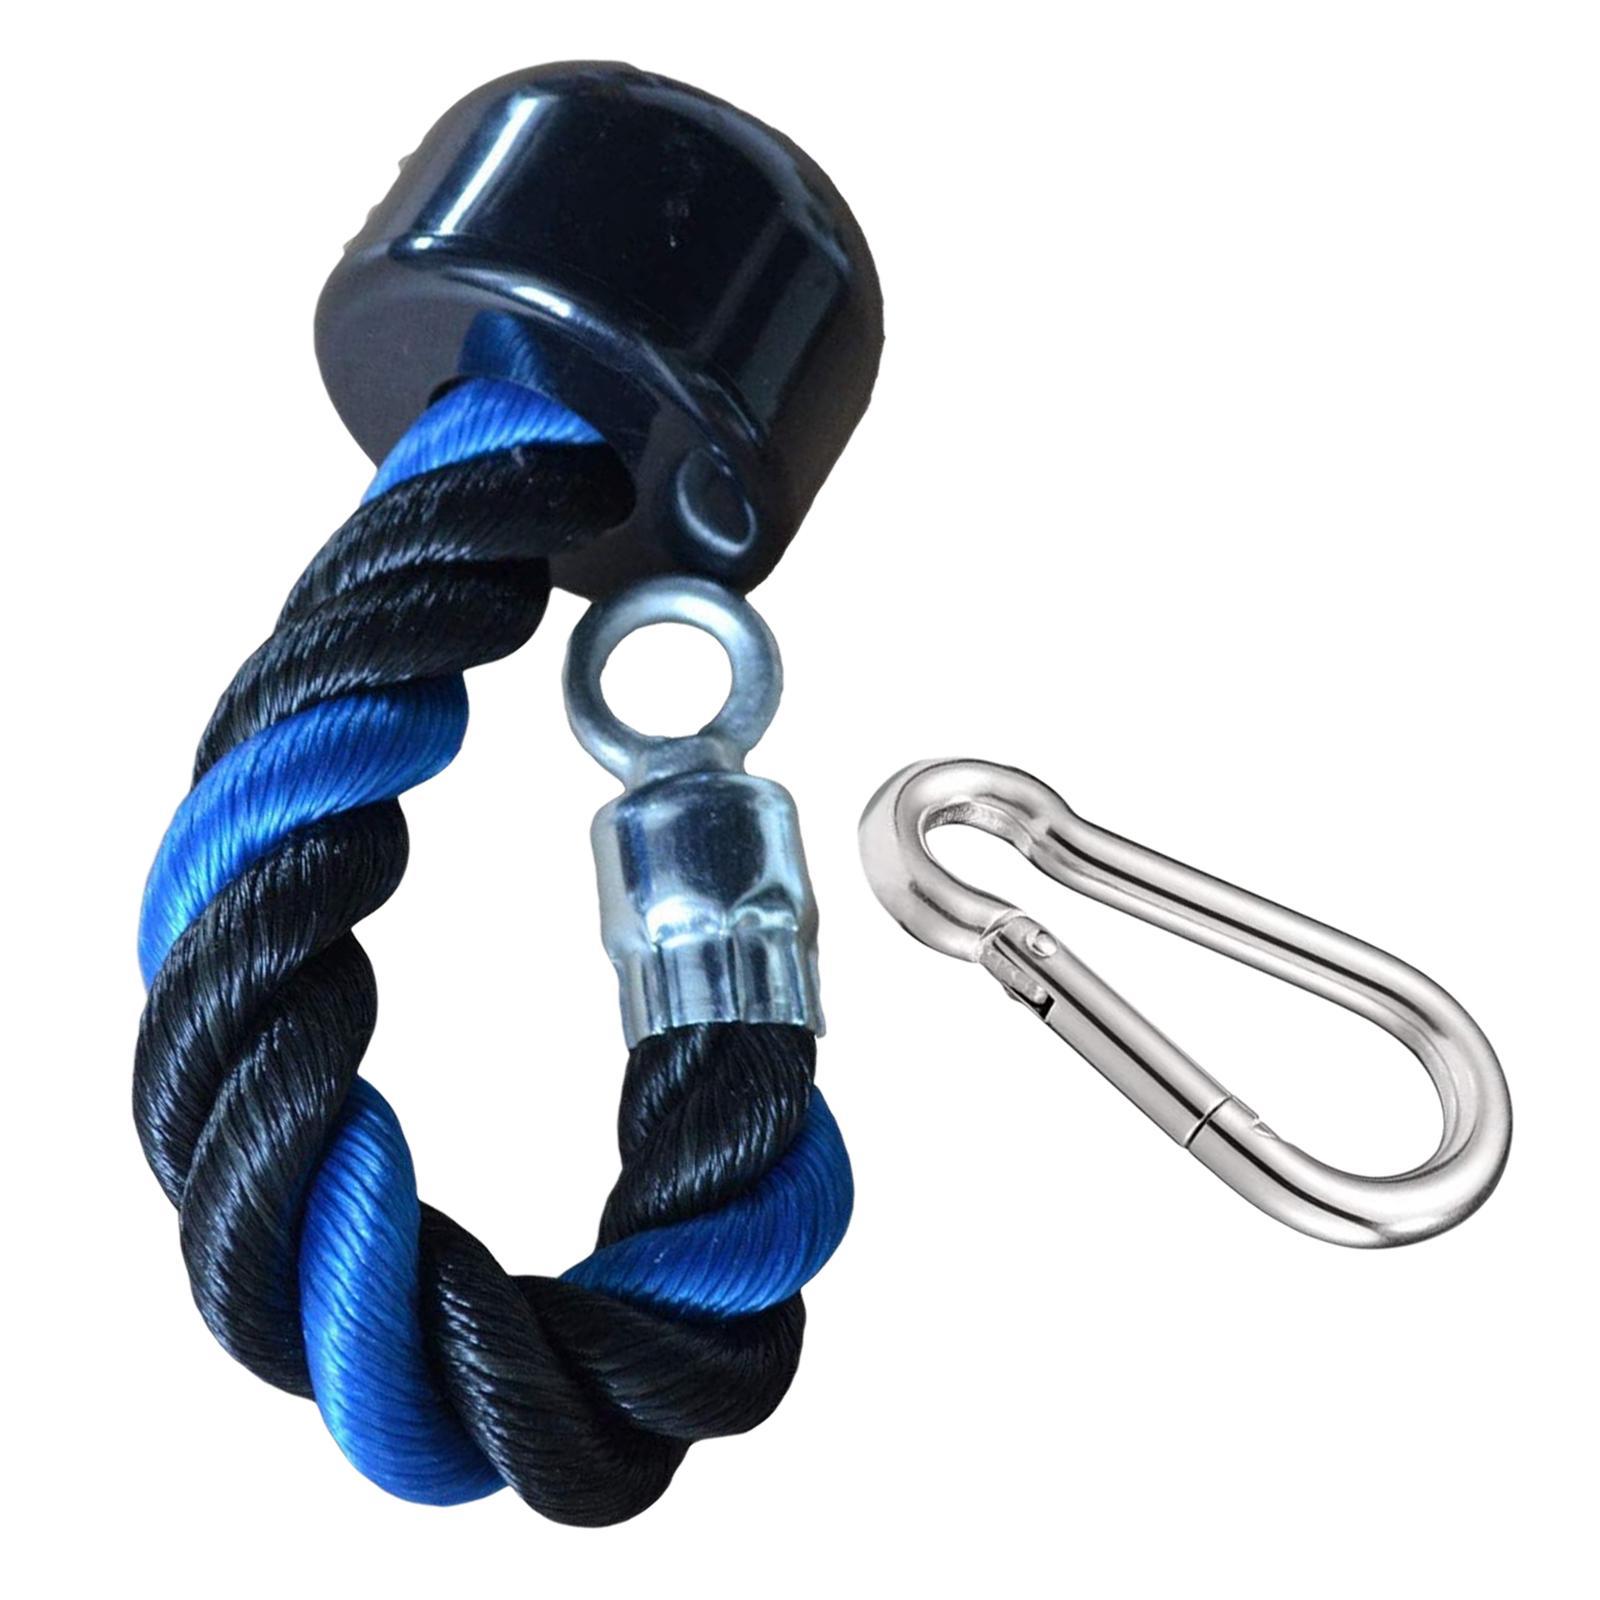 2xTriceps Rope Single Grip Pulley Cable Attachment Pull Down LAT Handle Blue